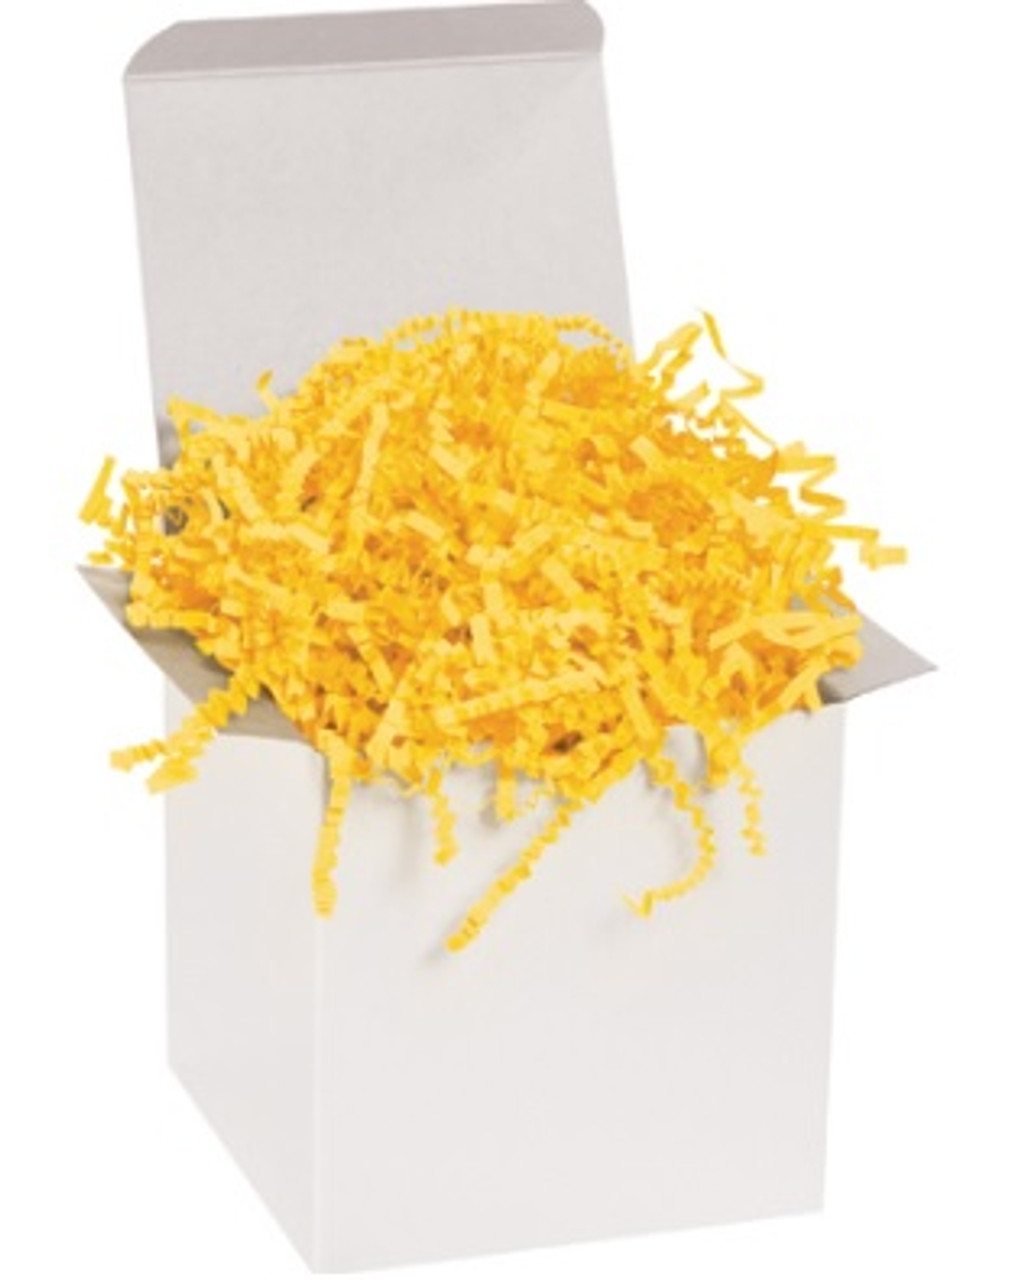 1 Bag of Yellow Crinkle Cut Paper Shred for Gift Packaging Wrap Basket  Filling